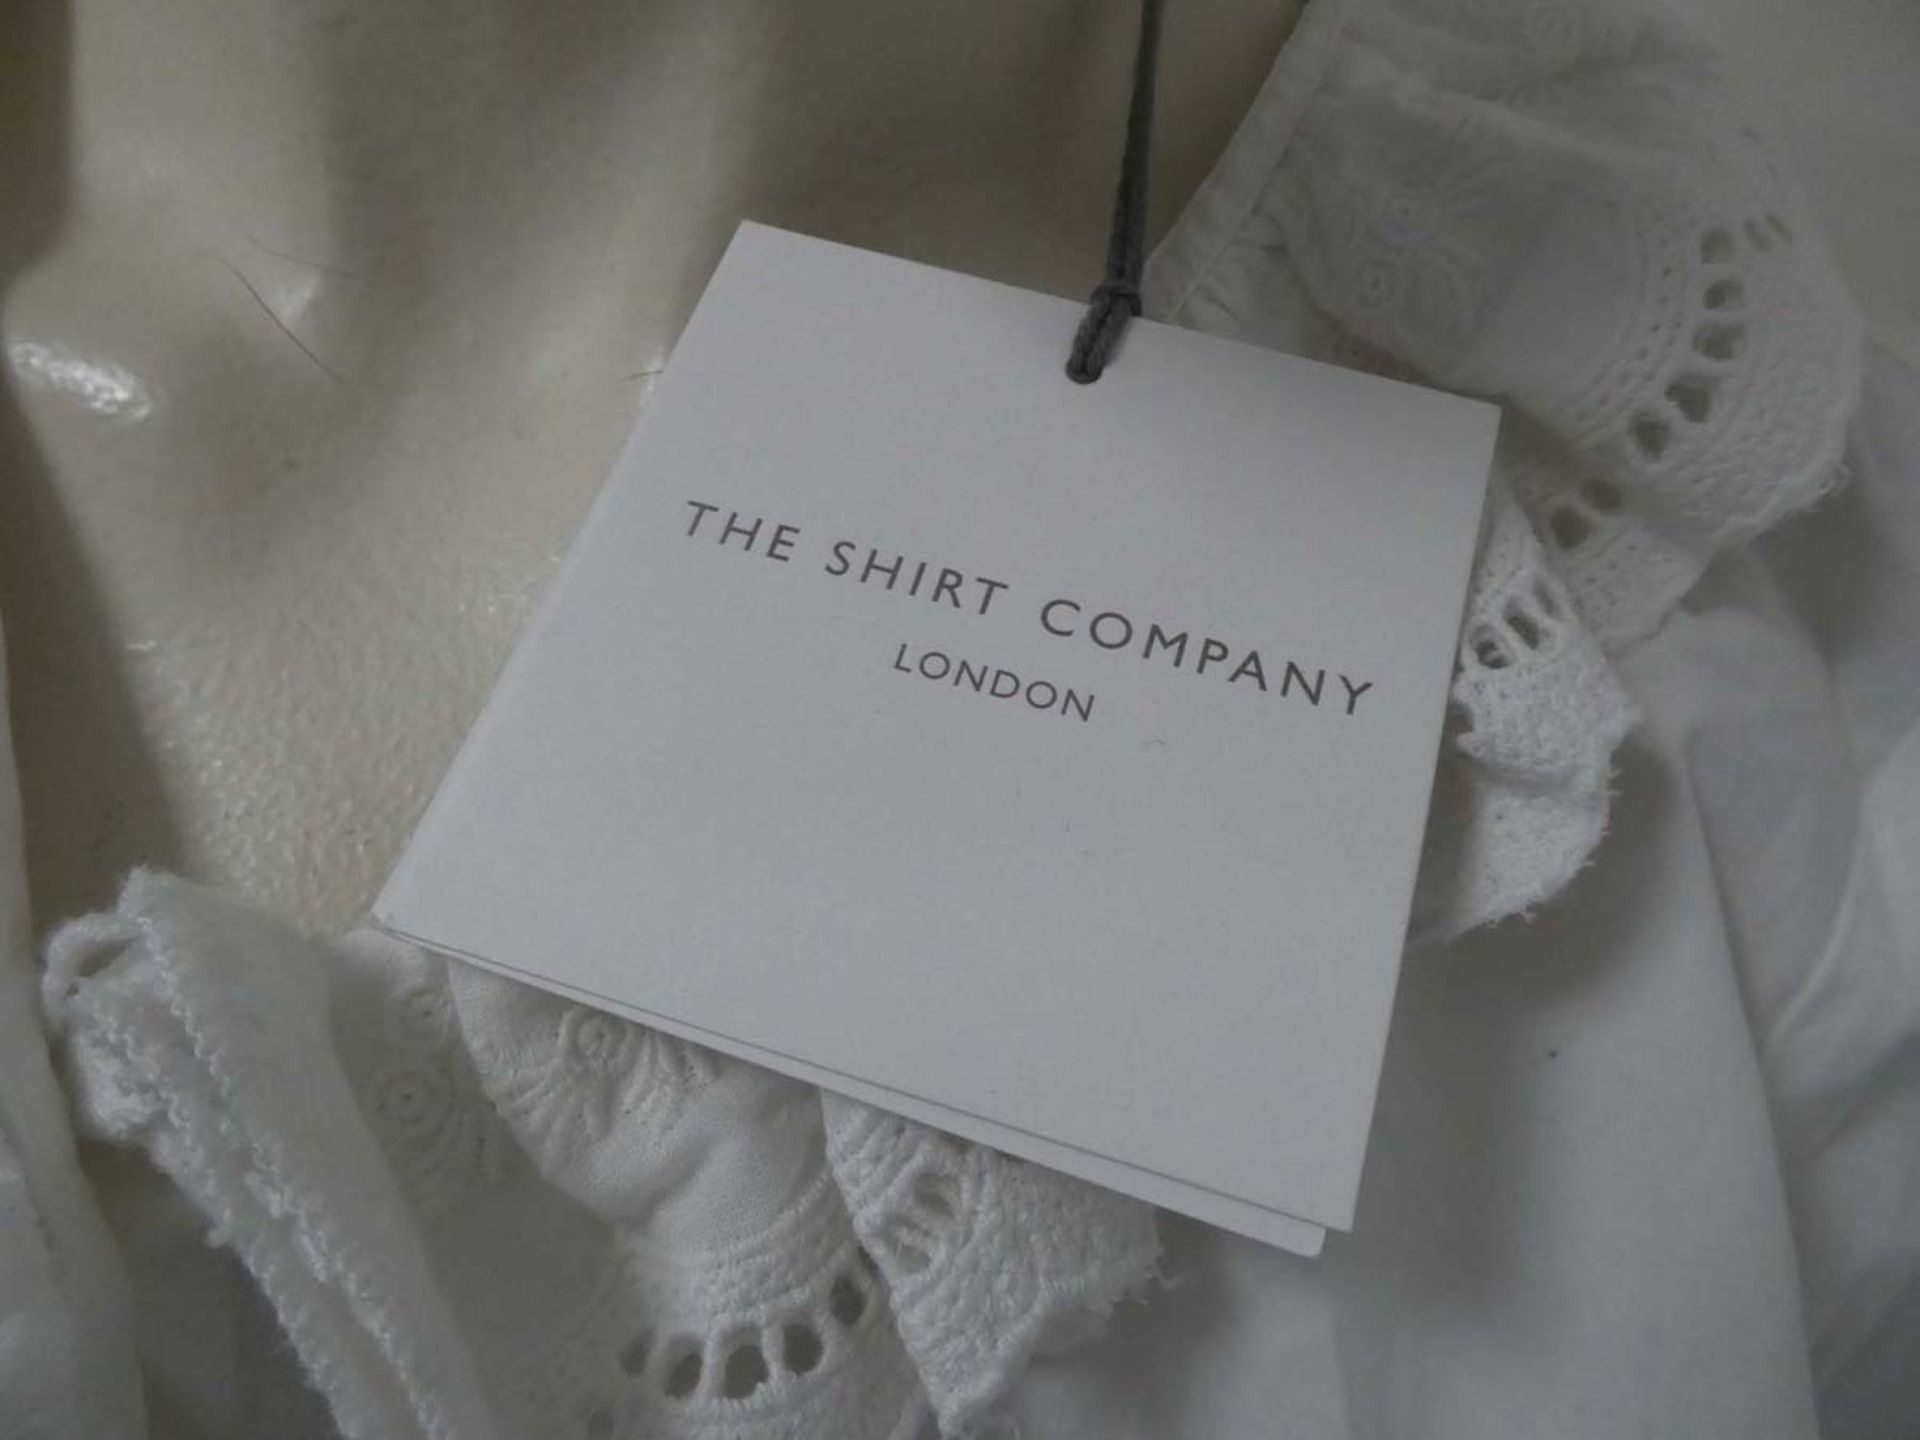 The Shirt Company London ladies Boho blouse in white size 10 (hanging) - Image 2 of 2